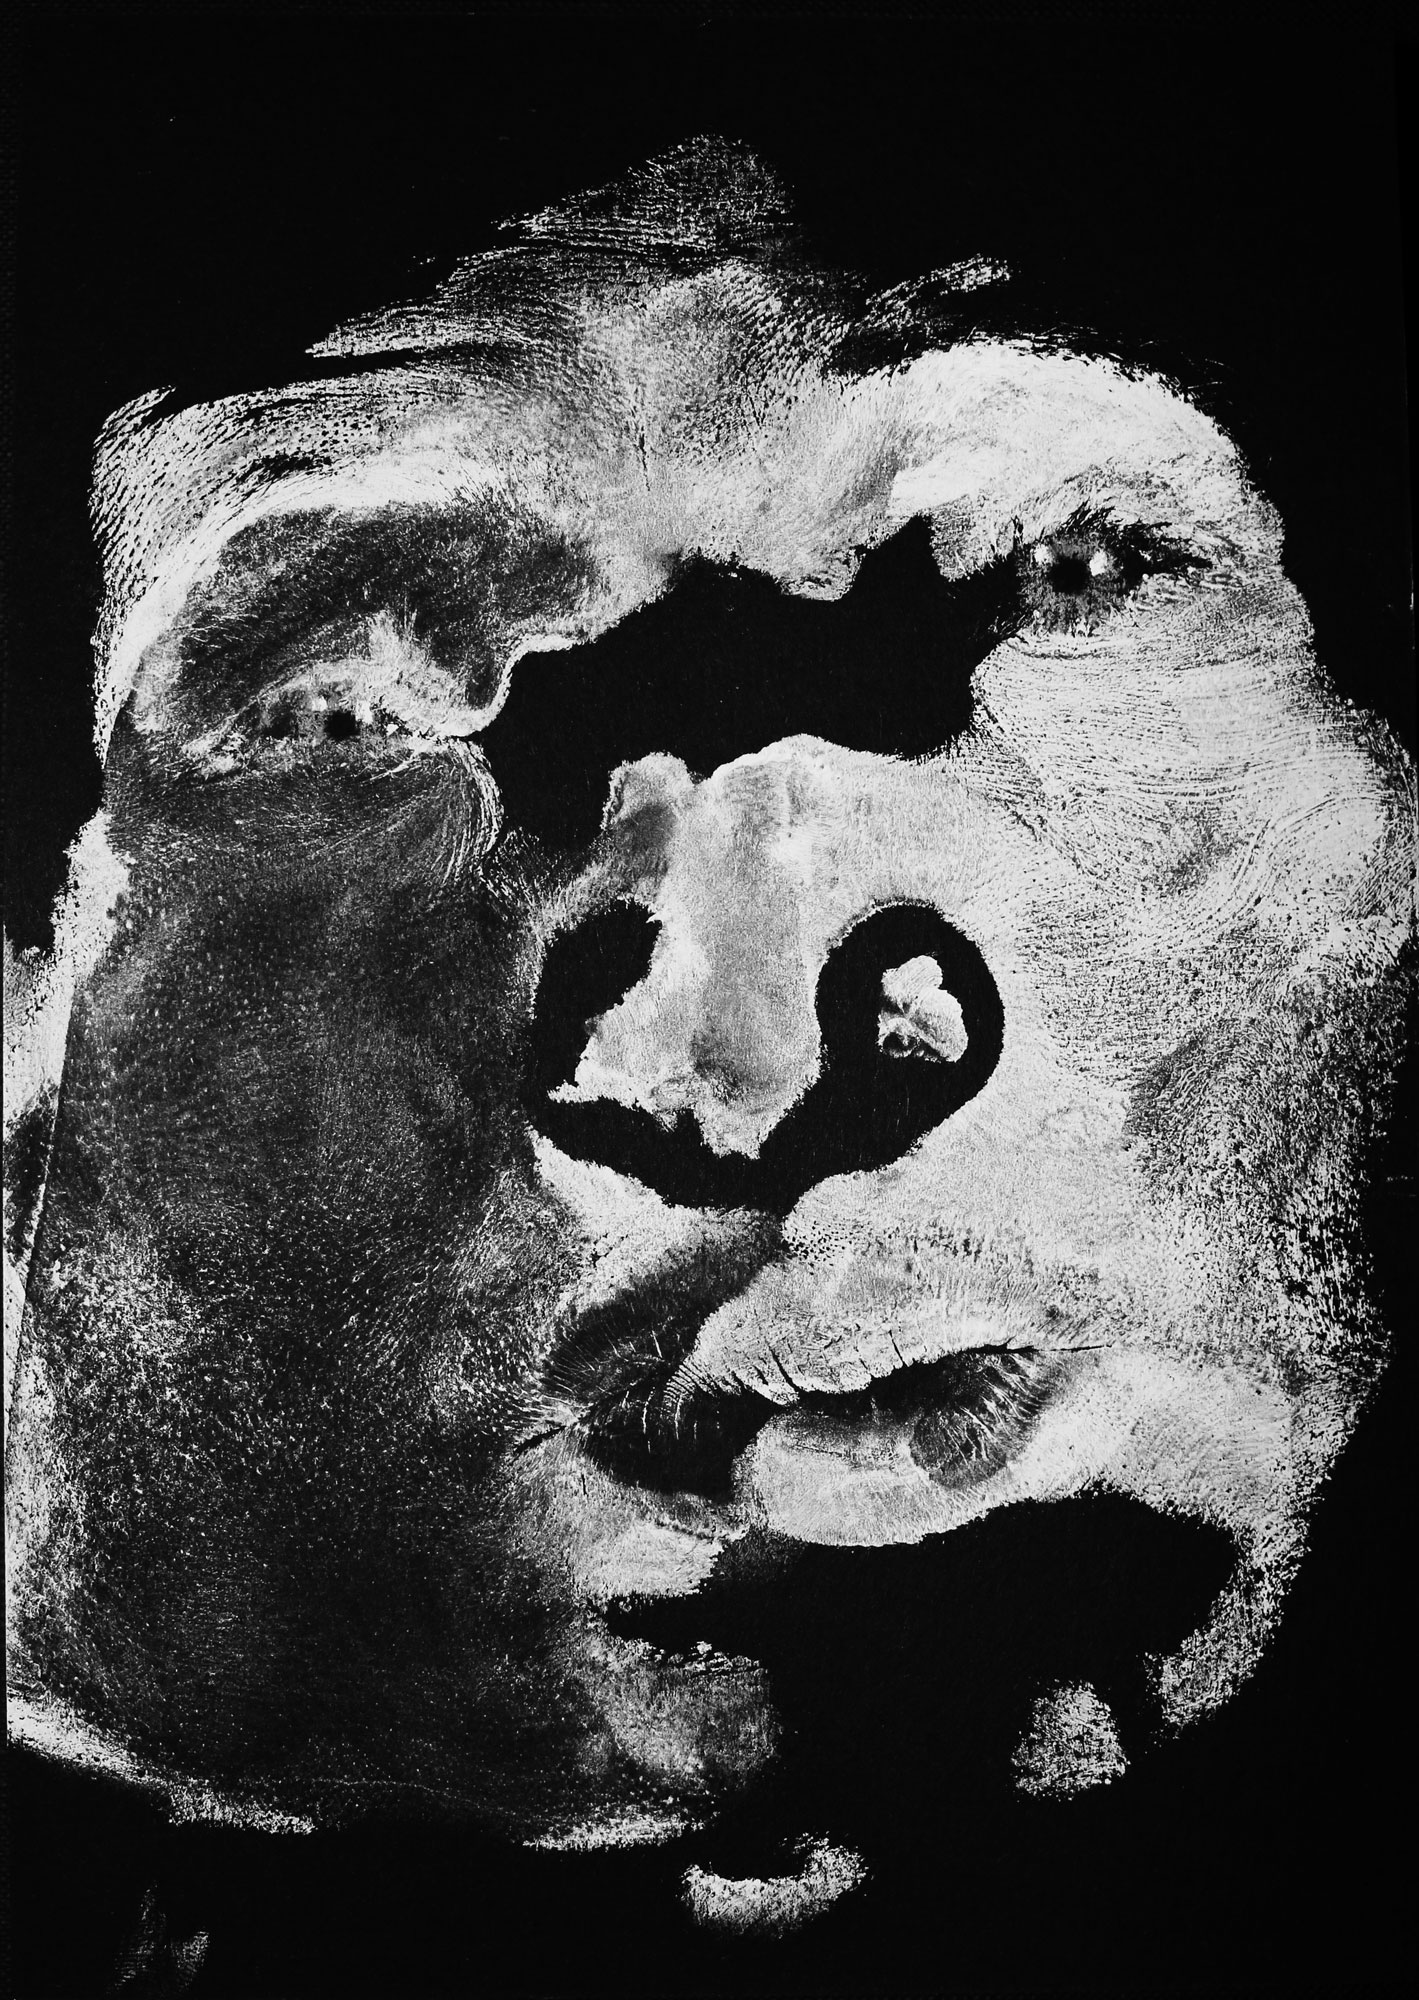 unique imprint of a face suggesting some emotion, in white color on black cardboard, with eyes drawn in white pastel